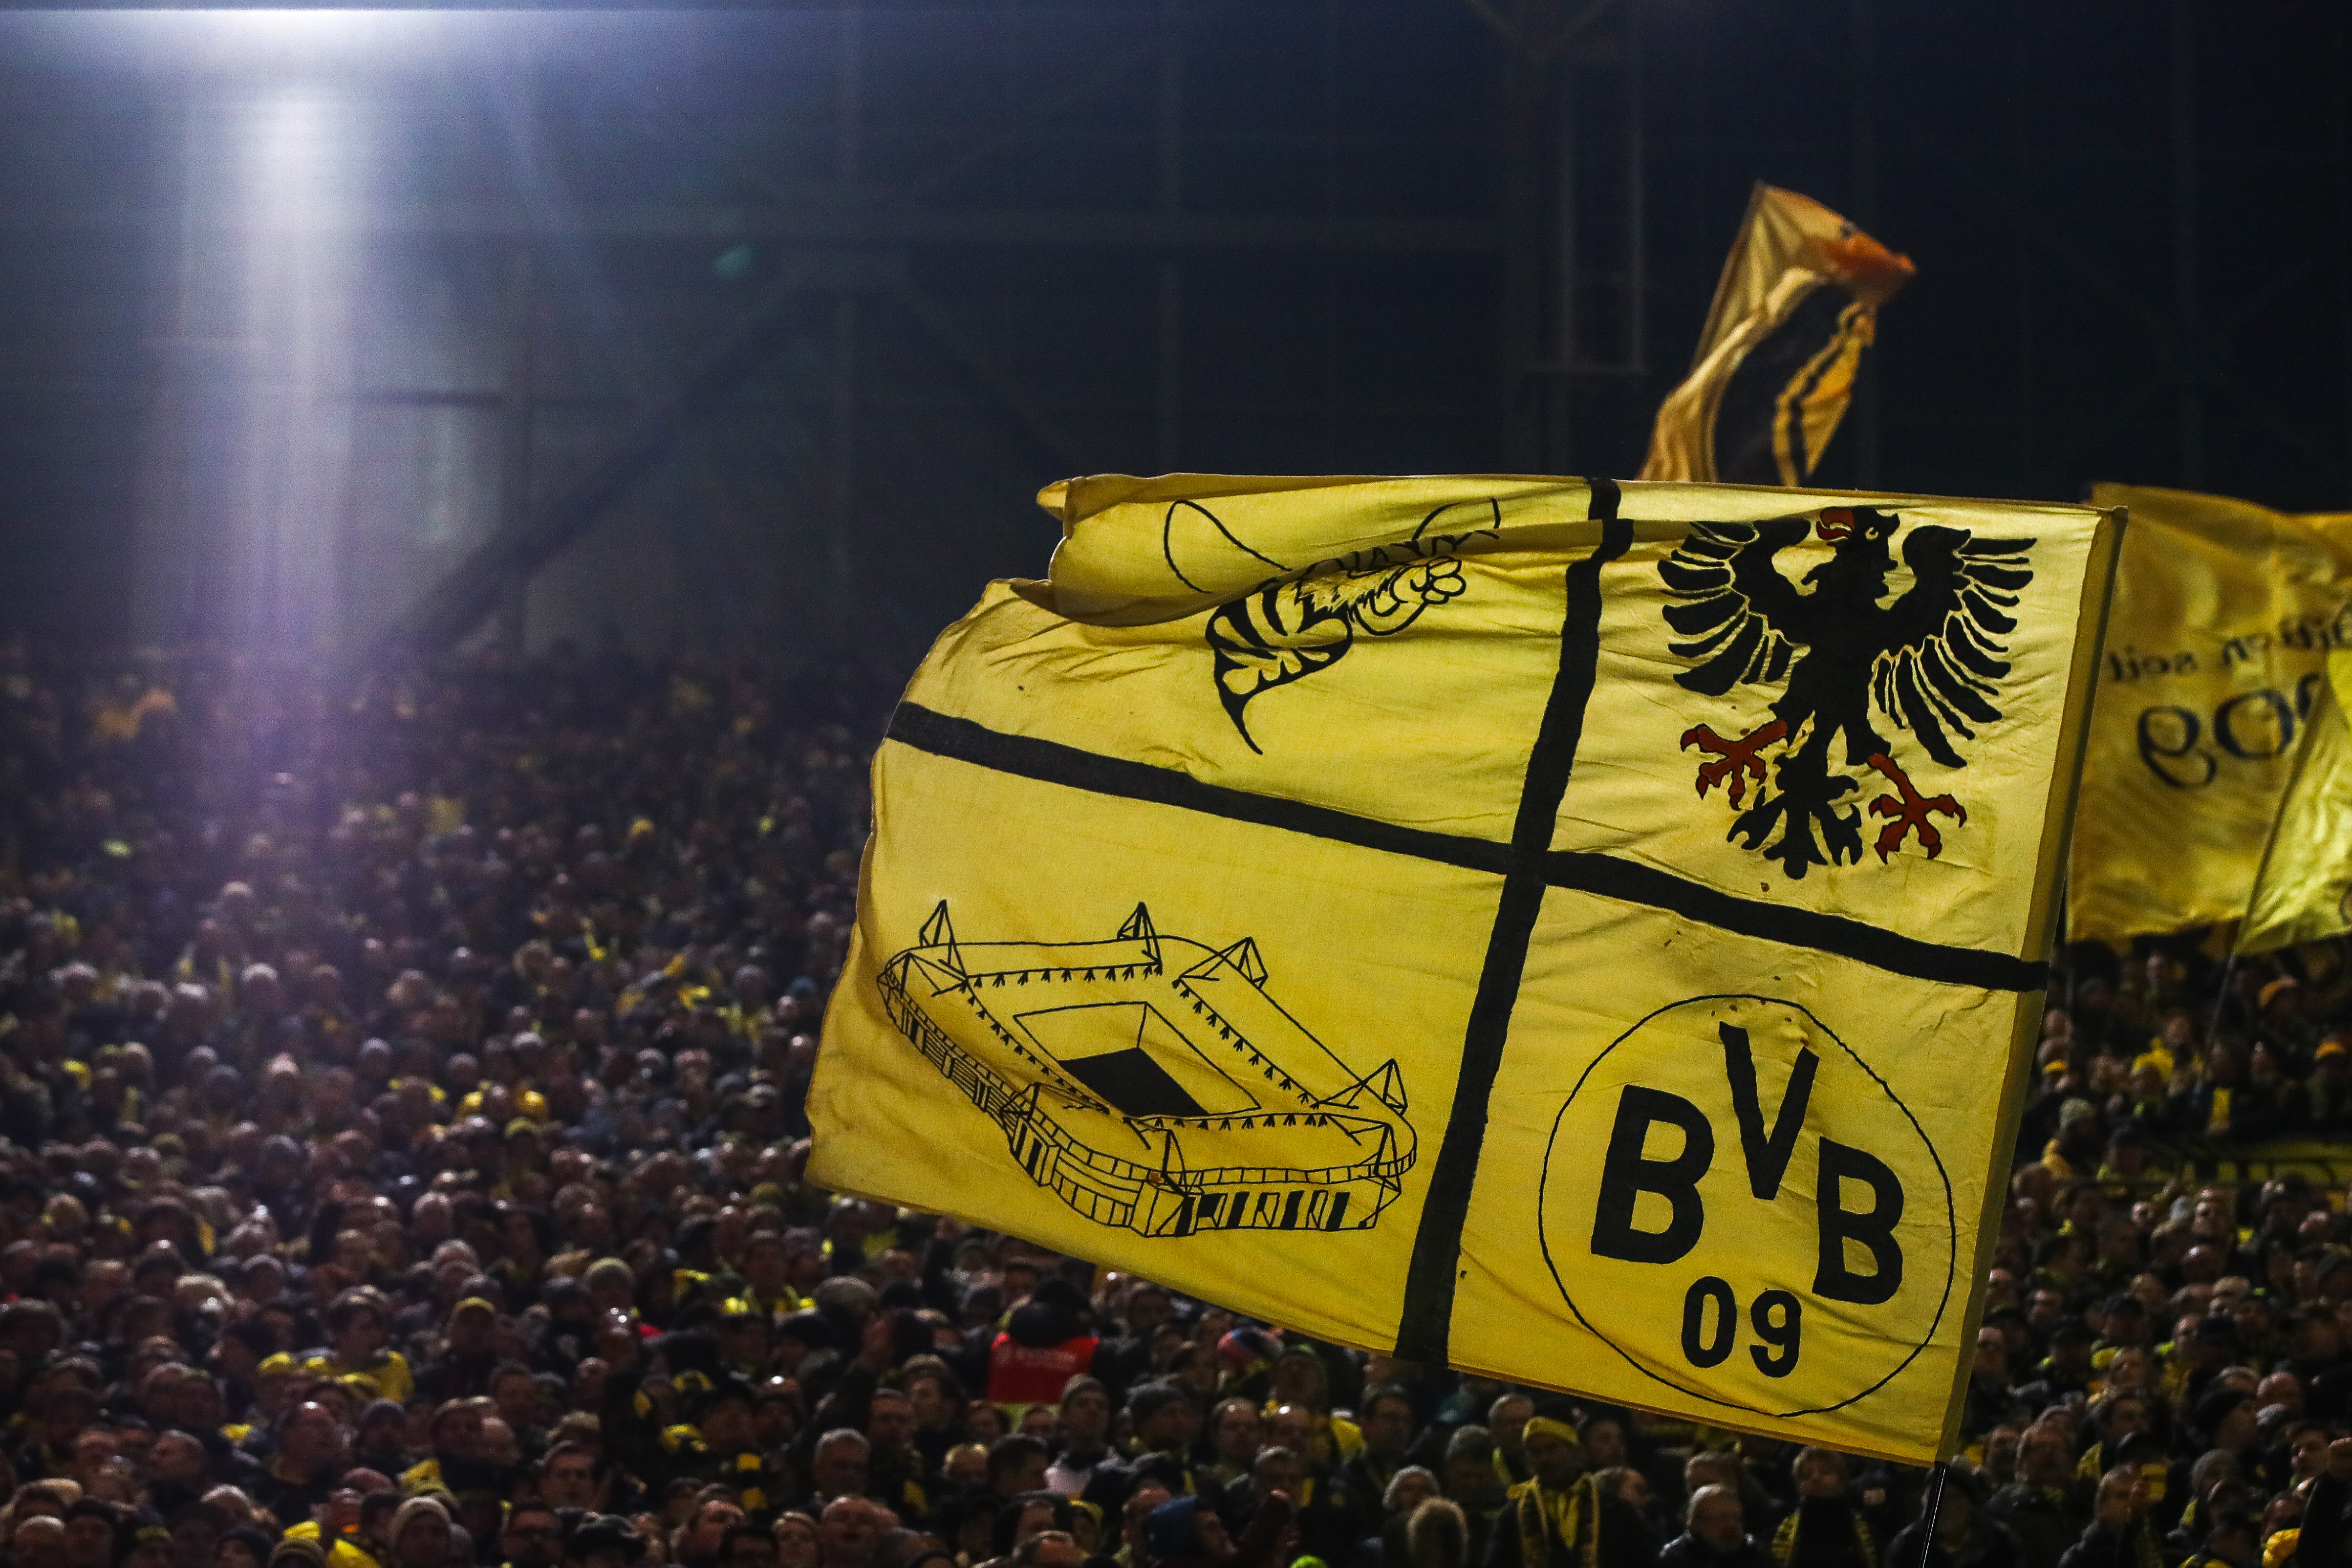 DORTMUND, GERMANY - JANUARY 14: Fans of Dortmund wave their flags at the "Sudtribune" (South Stand) known as the Yellow Wall prior the Bundesliga match between Borussia Dortmund and VfL Wolfsburg at Signal Iduna Park on January 14, 2018 in Dortmund, Germany. (Photo by Maja Hitij/Bongarts/Getty Images)